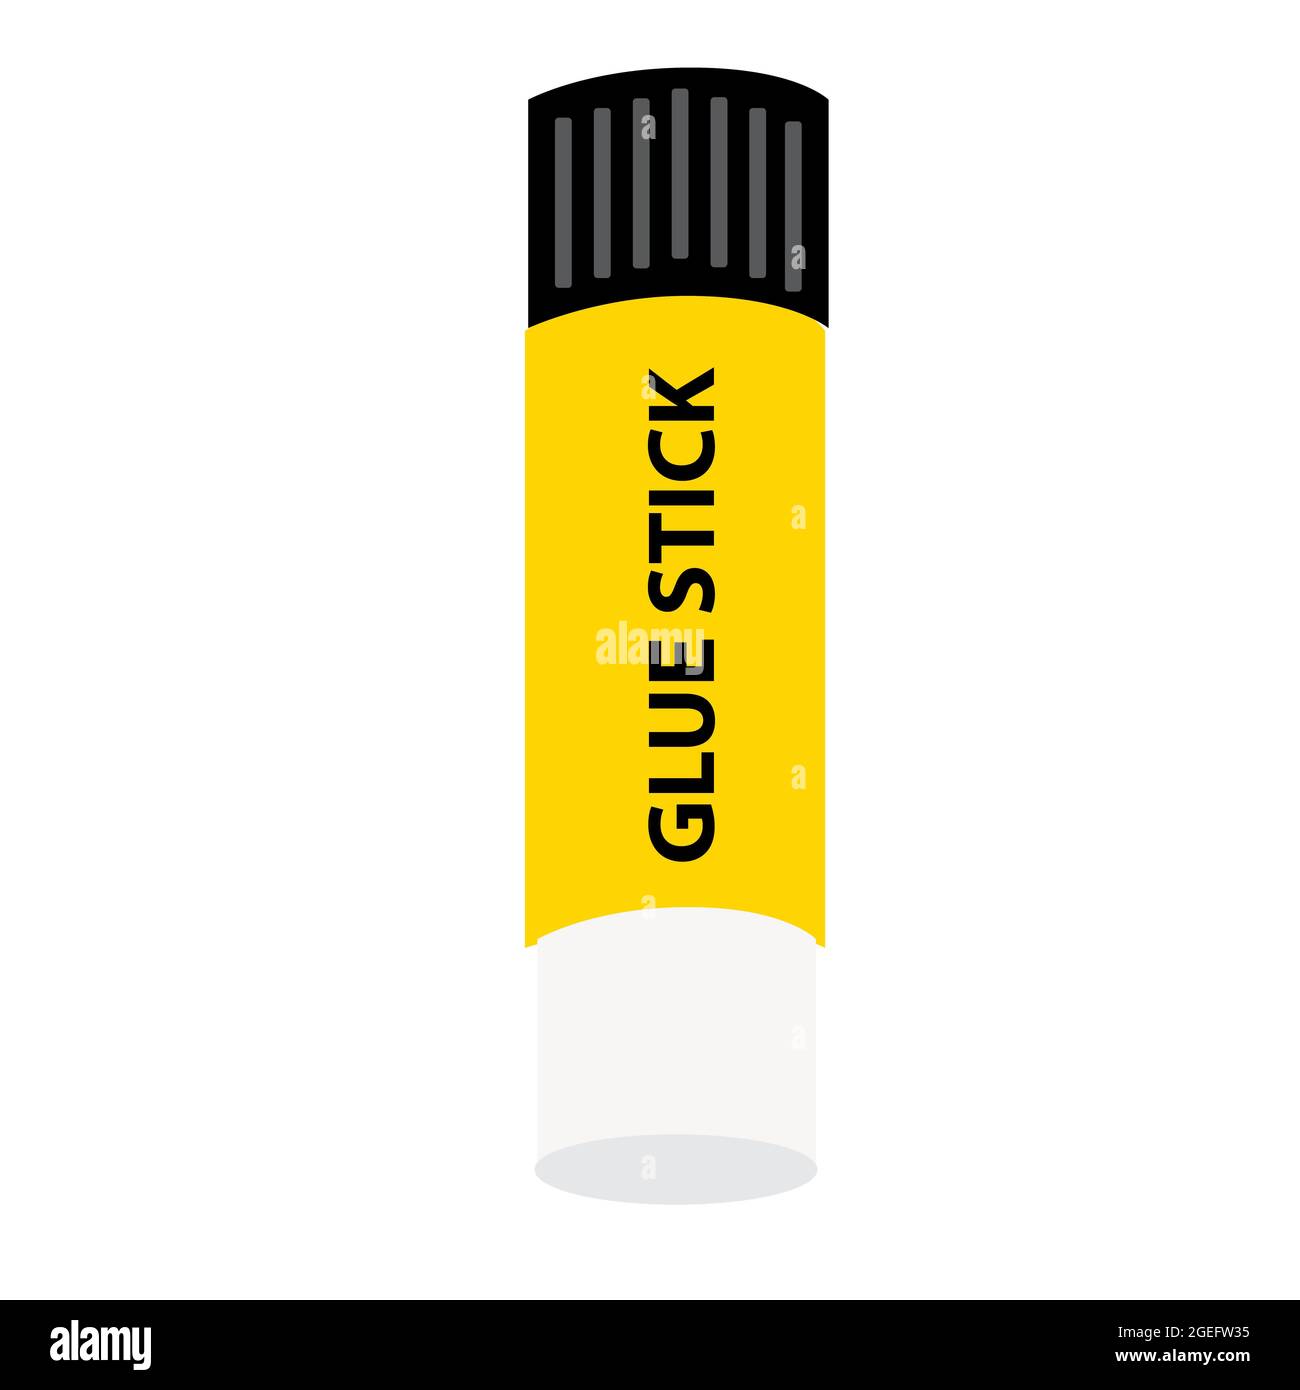 Vector Illustration Of Glue And Glue Stick Isolated On White Stock